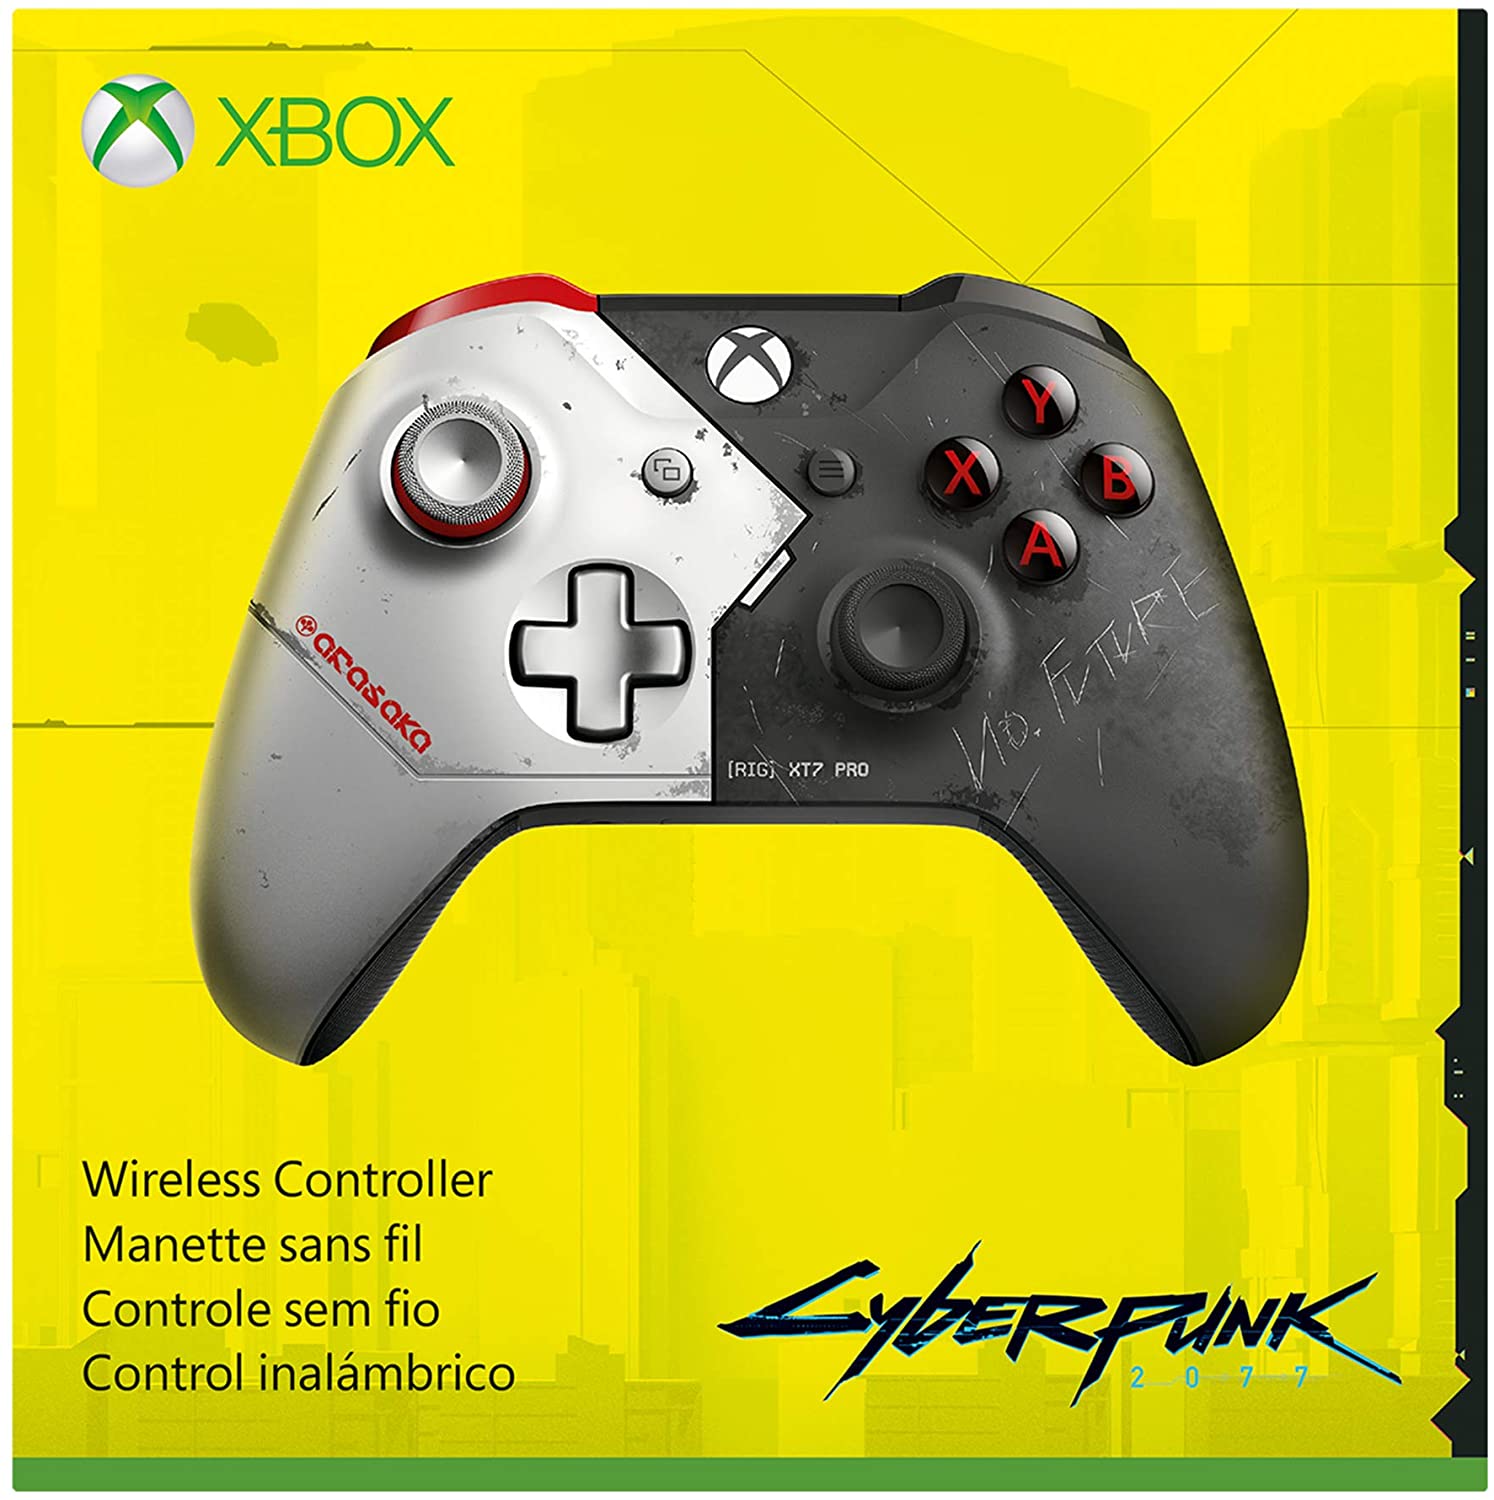 Image for The Cyberpunk 2077 Xbox One X has a hidden message revealed with UV light